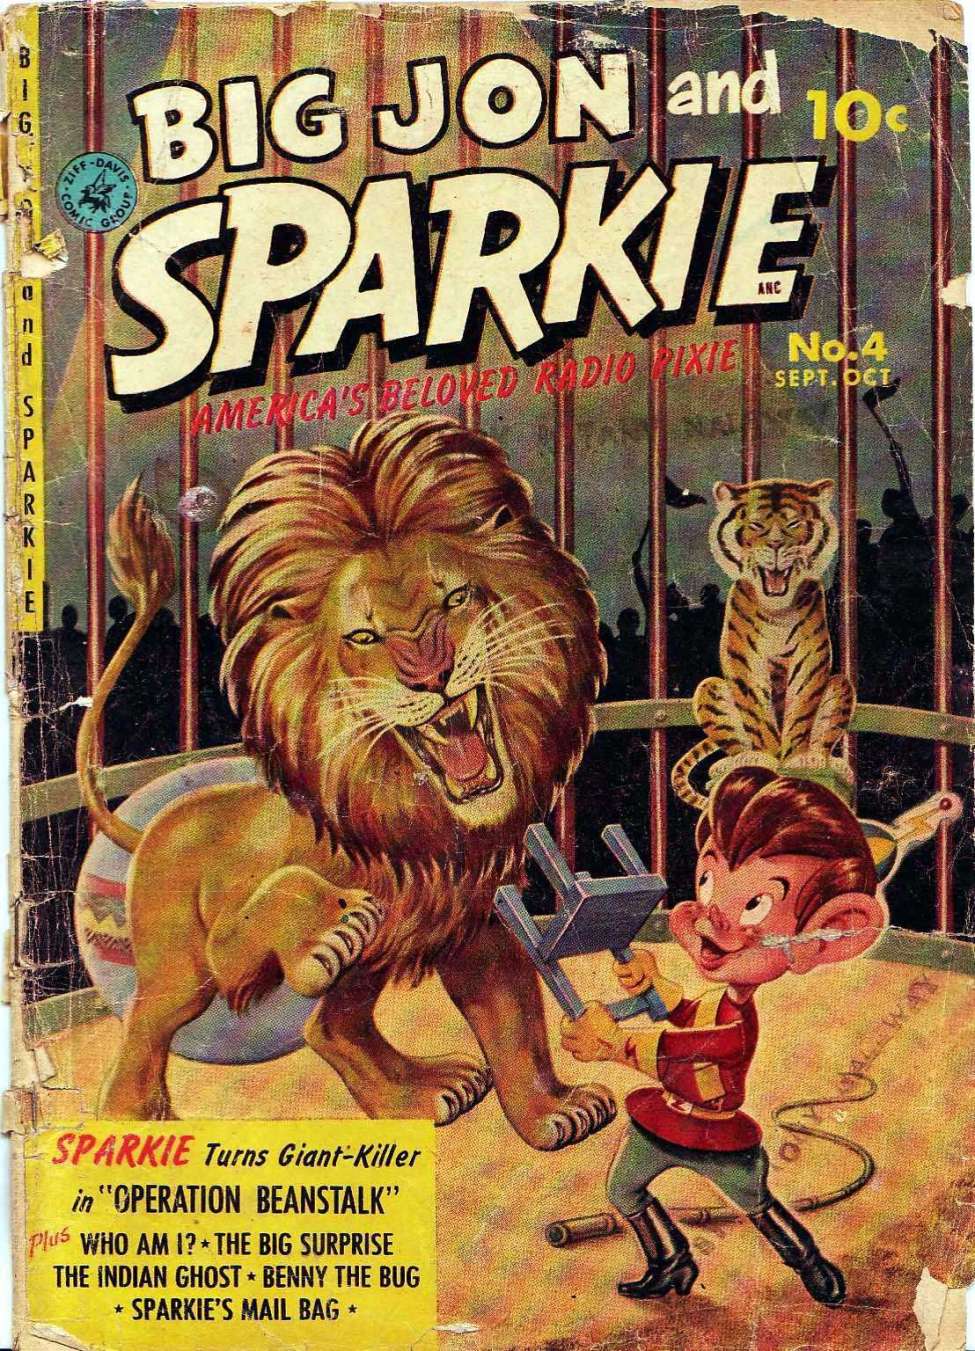 Book Cover For Big Jon and Sparkie